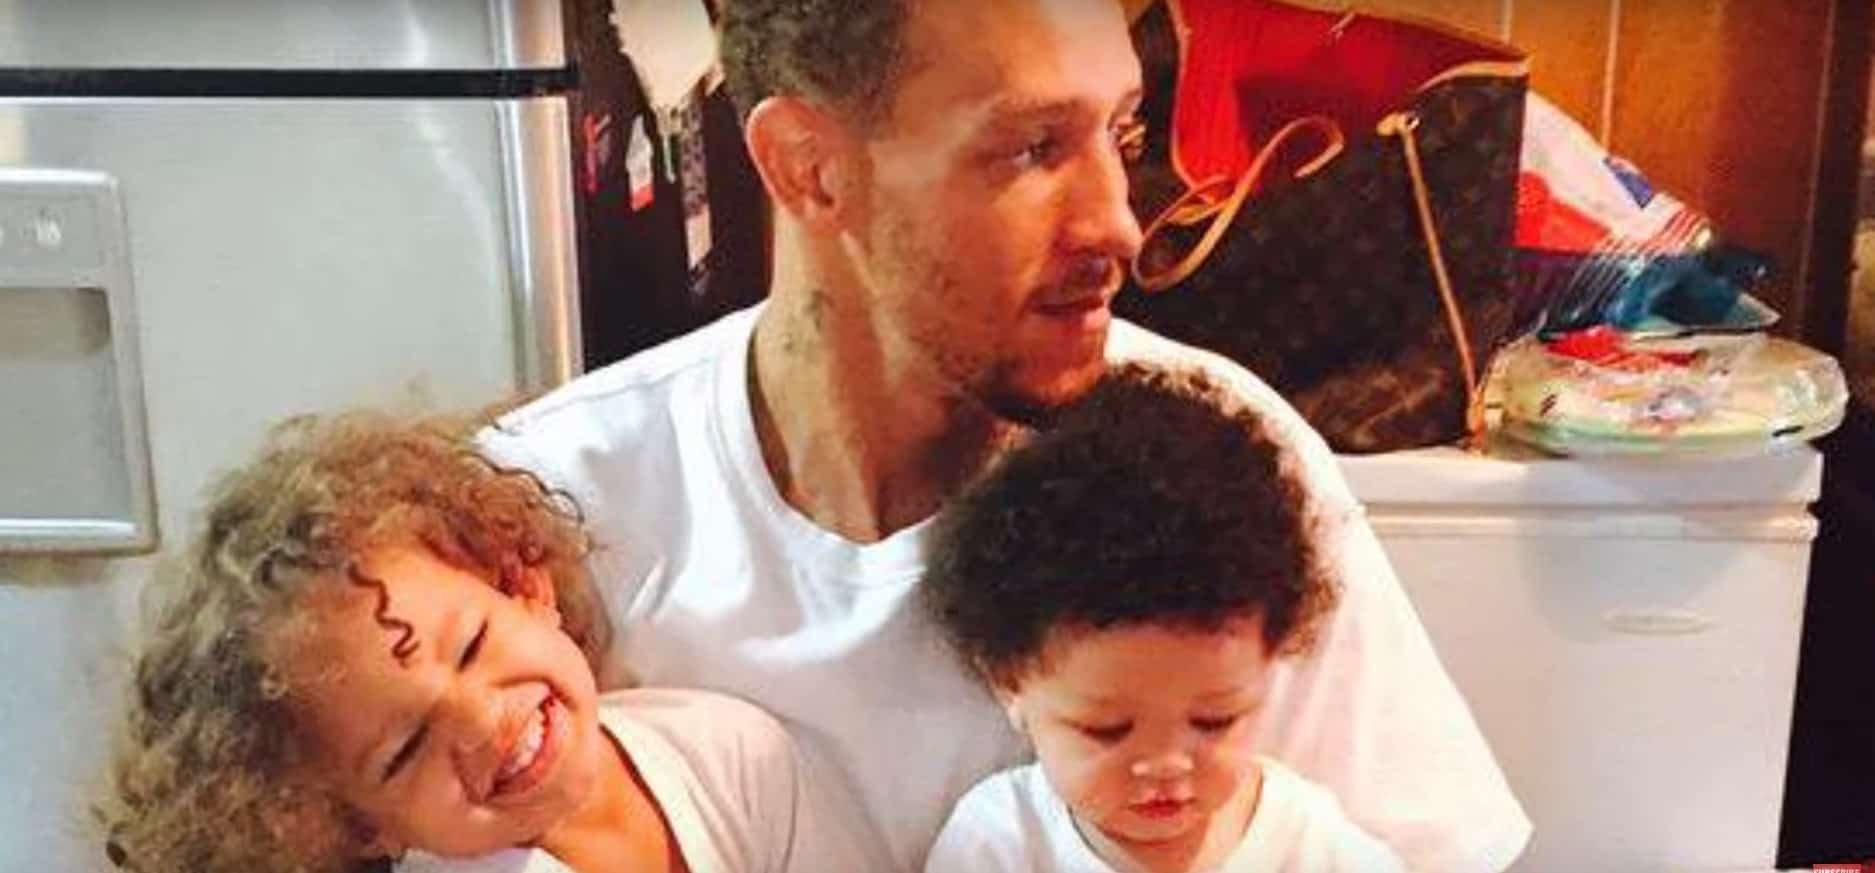 Image of Delonte West with his kids